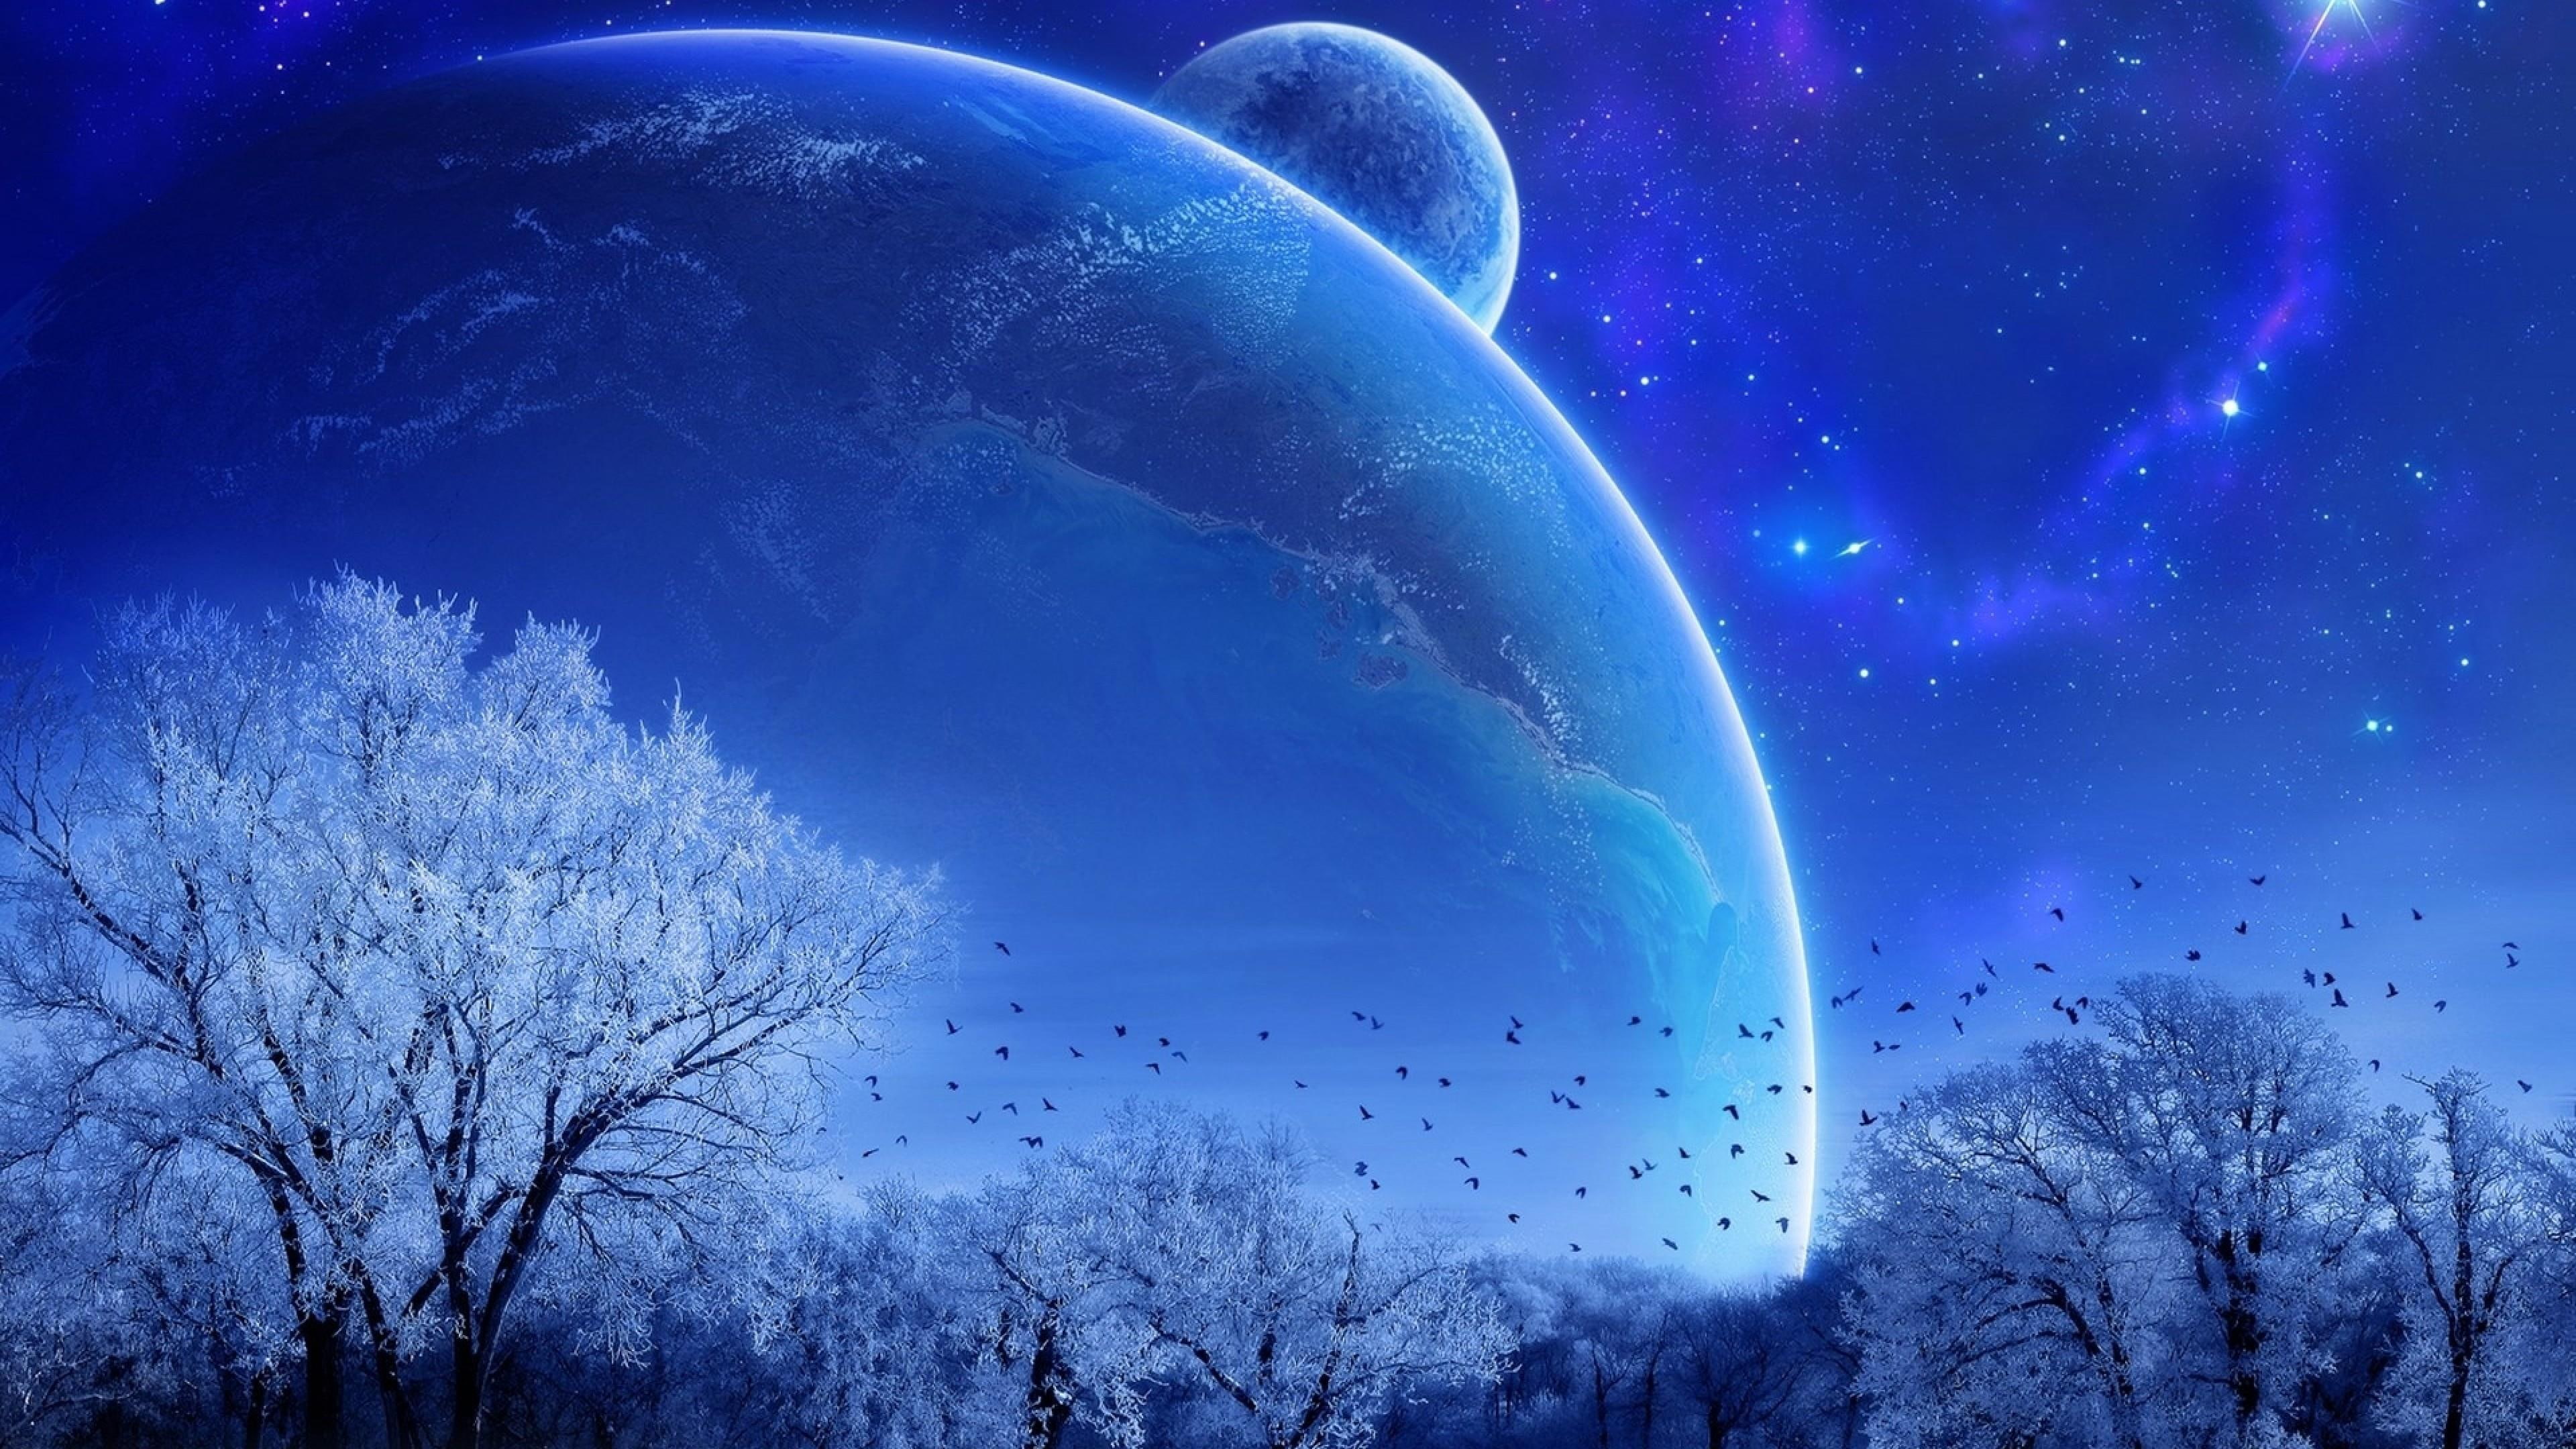 planets, sci-fi, snow, stars, birds, trees, cold, blue, starry